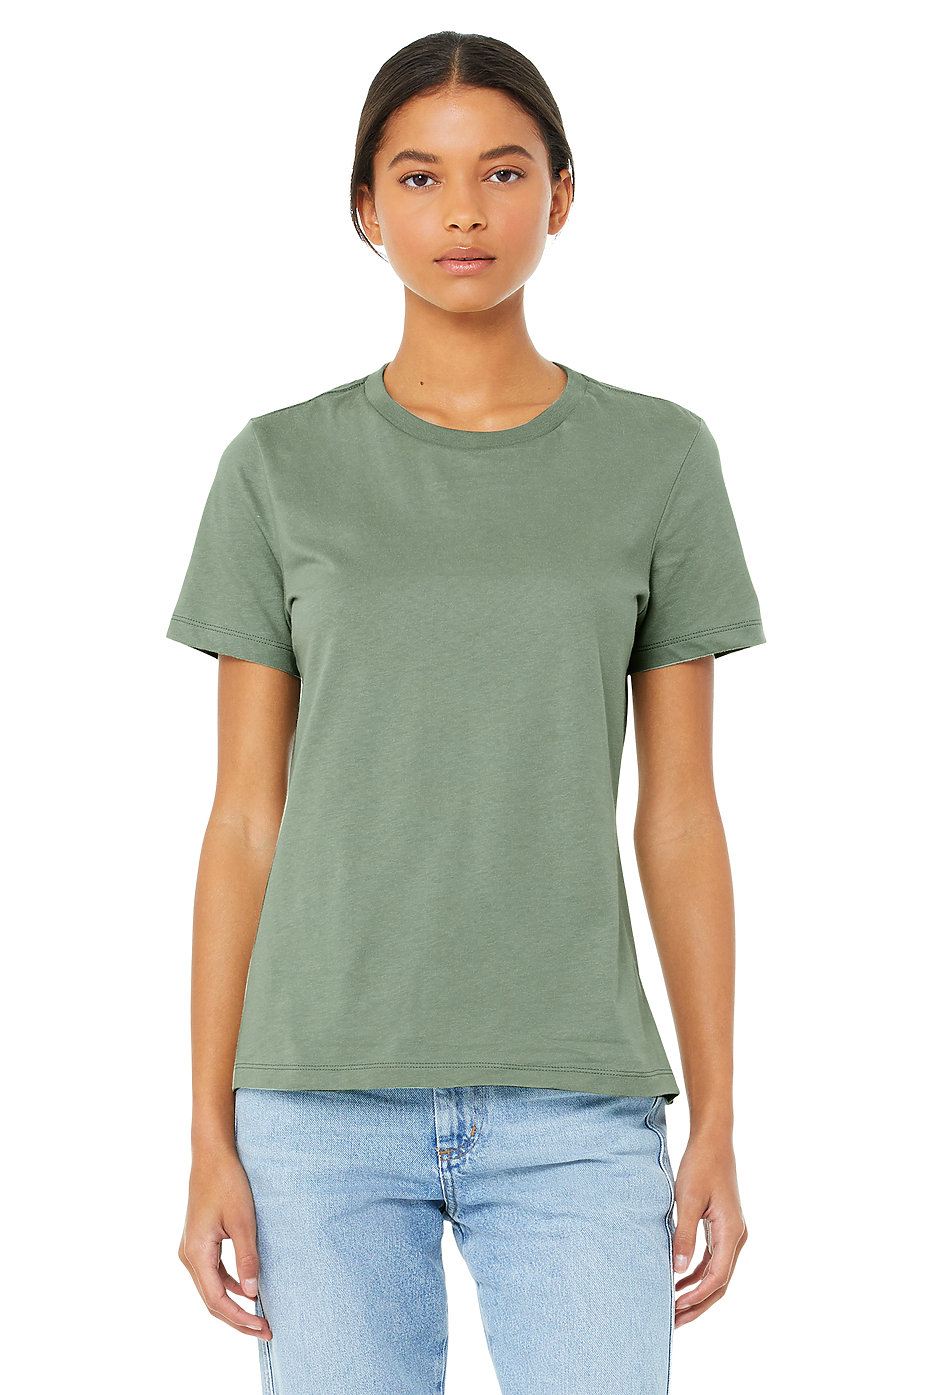 6400 Women's Relaxed Fit Tee in "Sage"